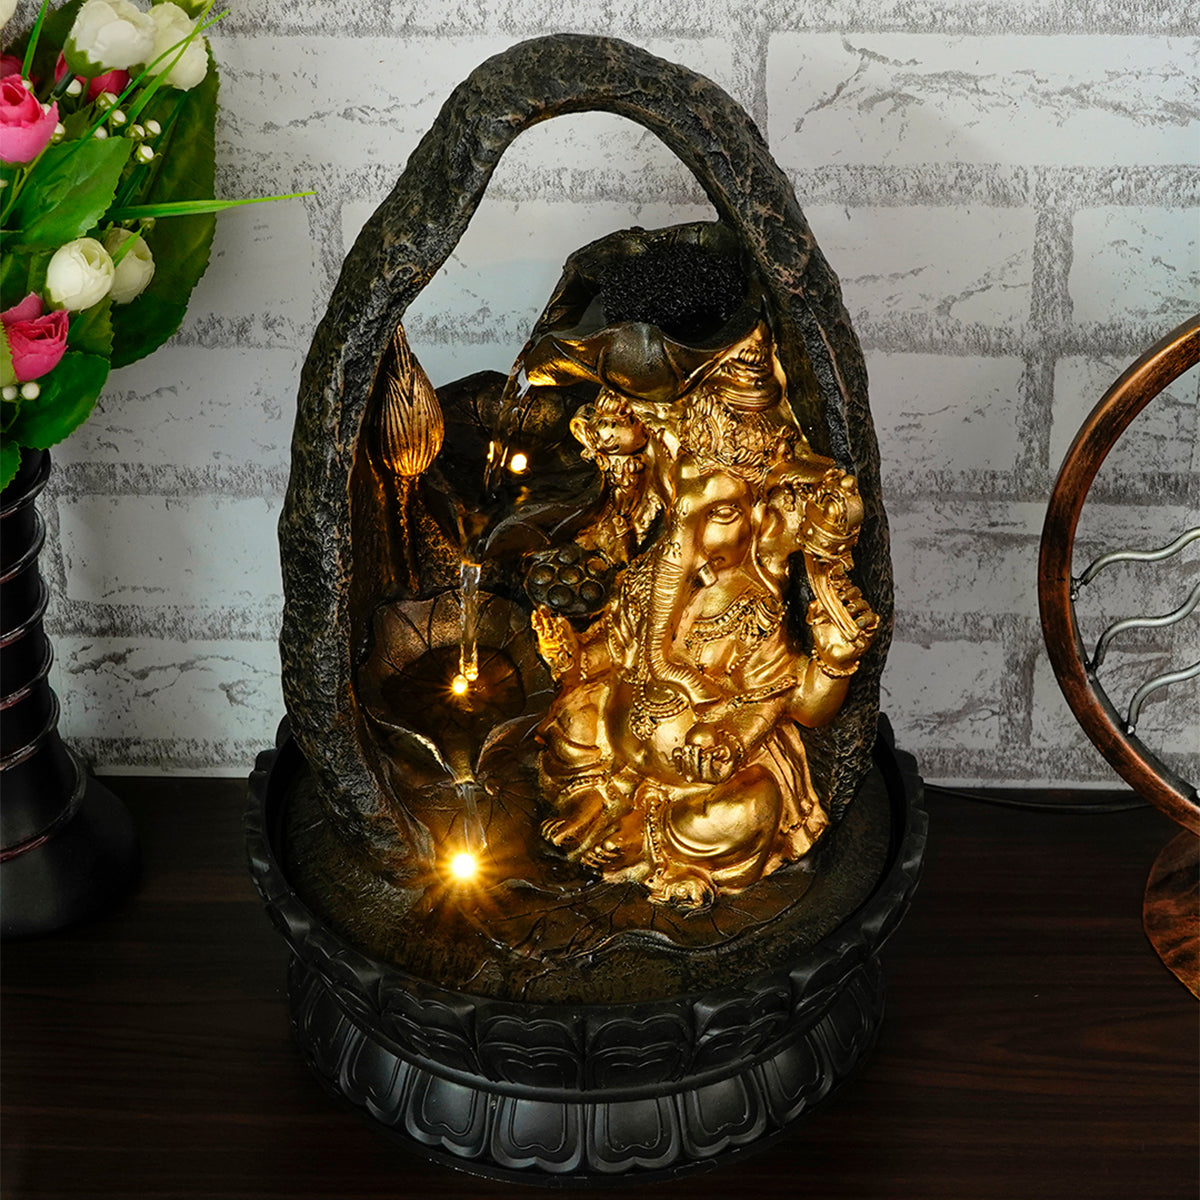 Polystone Black and Golden Decorative Lord Ganesha Idol Water Fountain With Light For Home/Office Décor